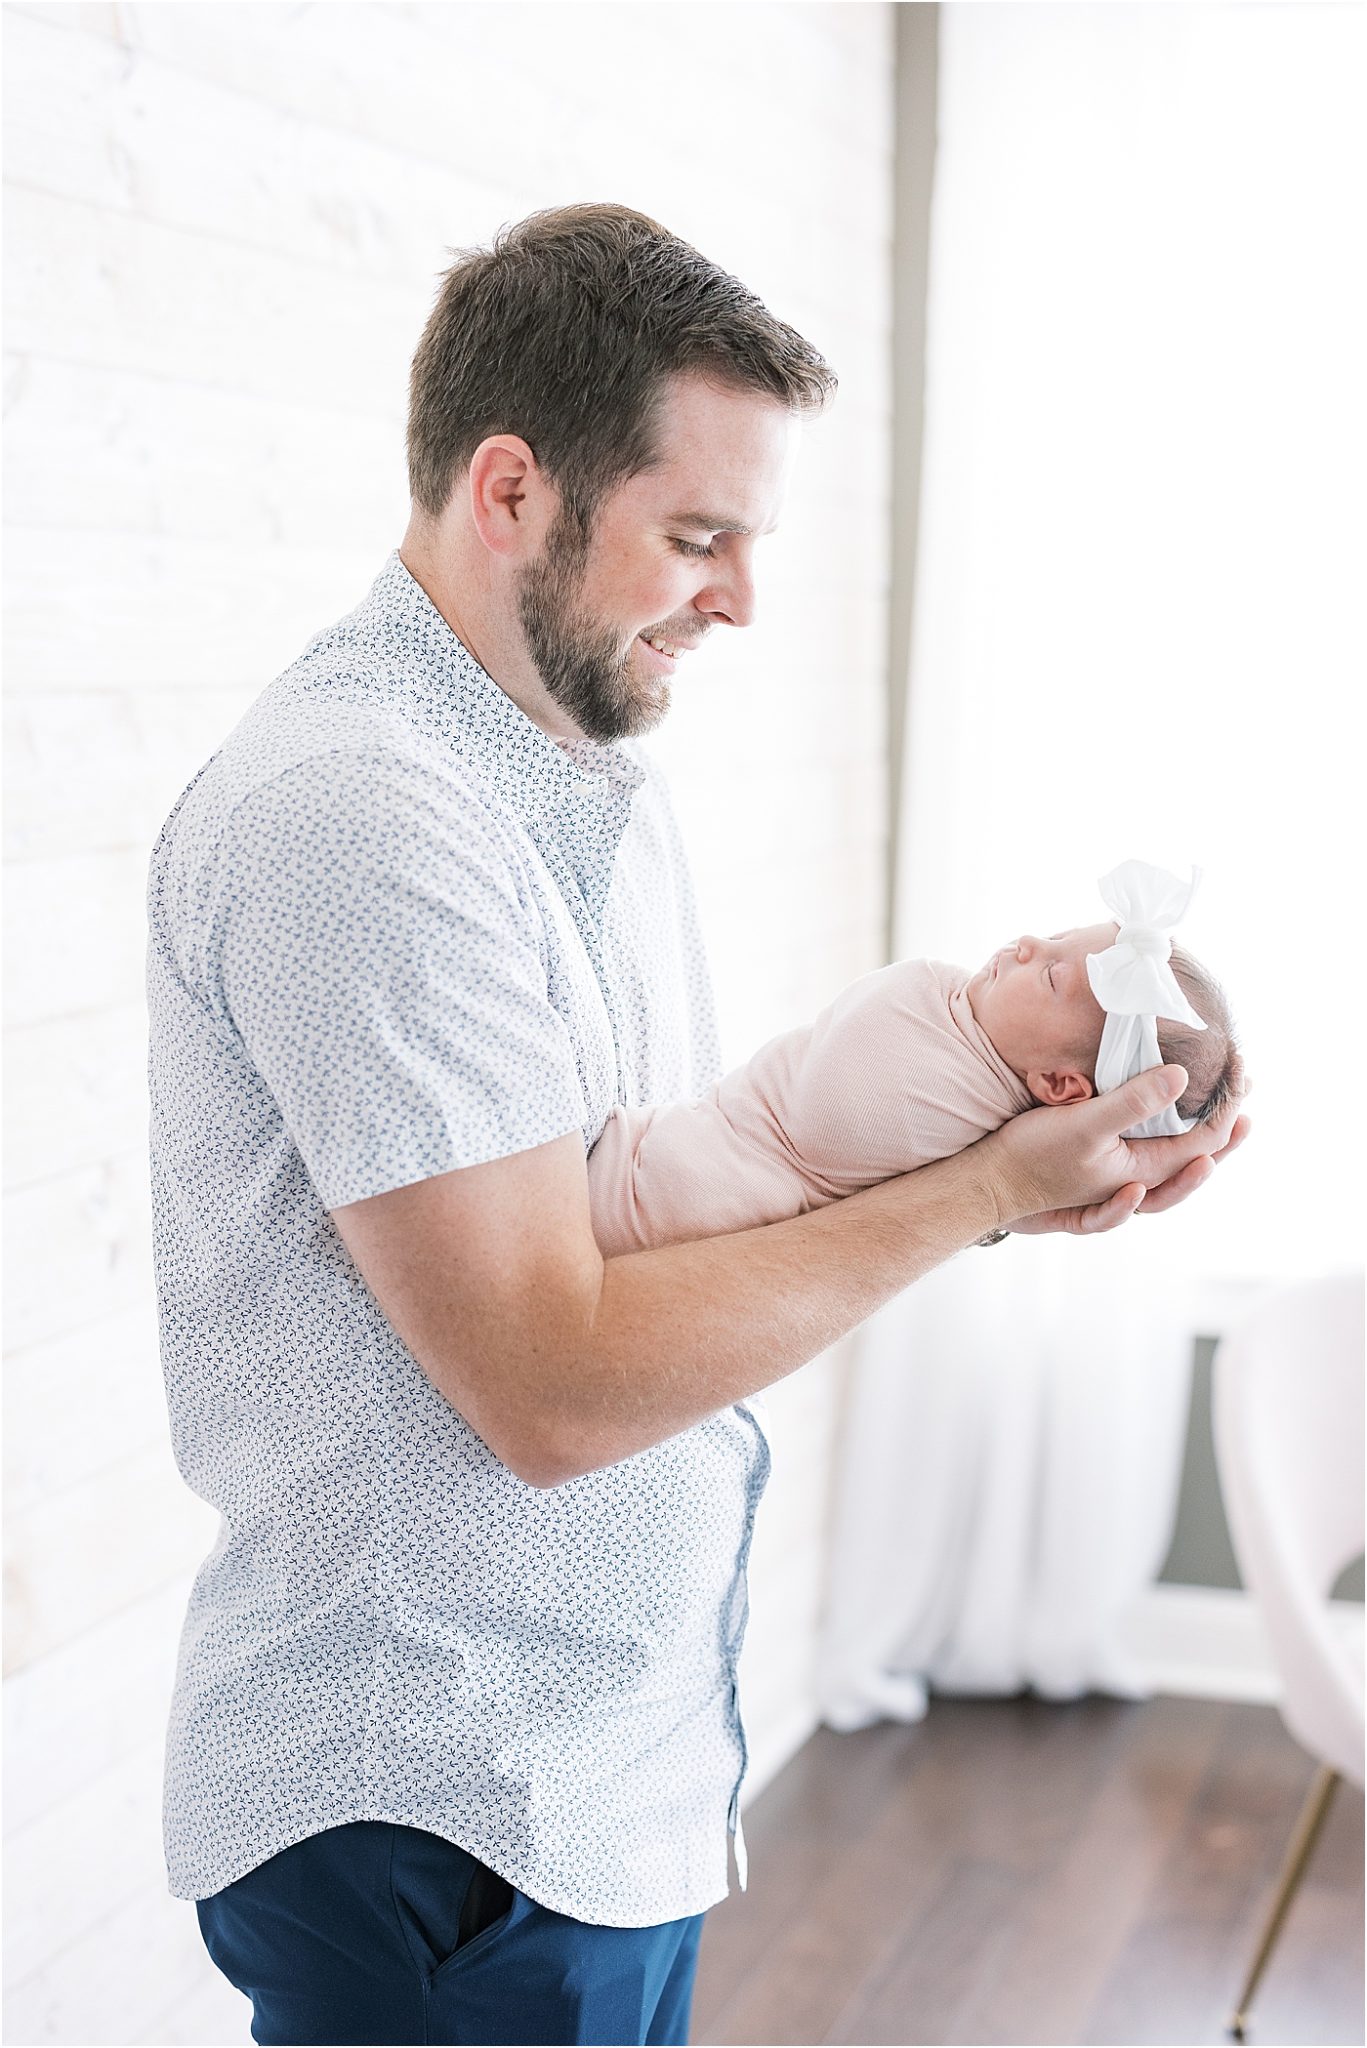 Dad holding baby girl. Photo by Westfield newborn photographer, Lindsay Konopa Photography.